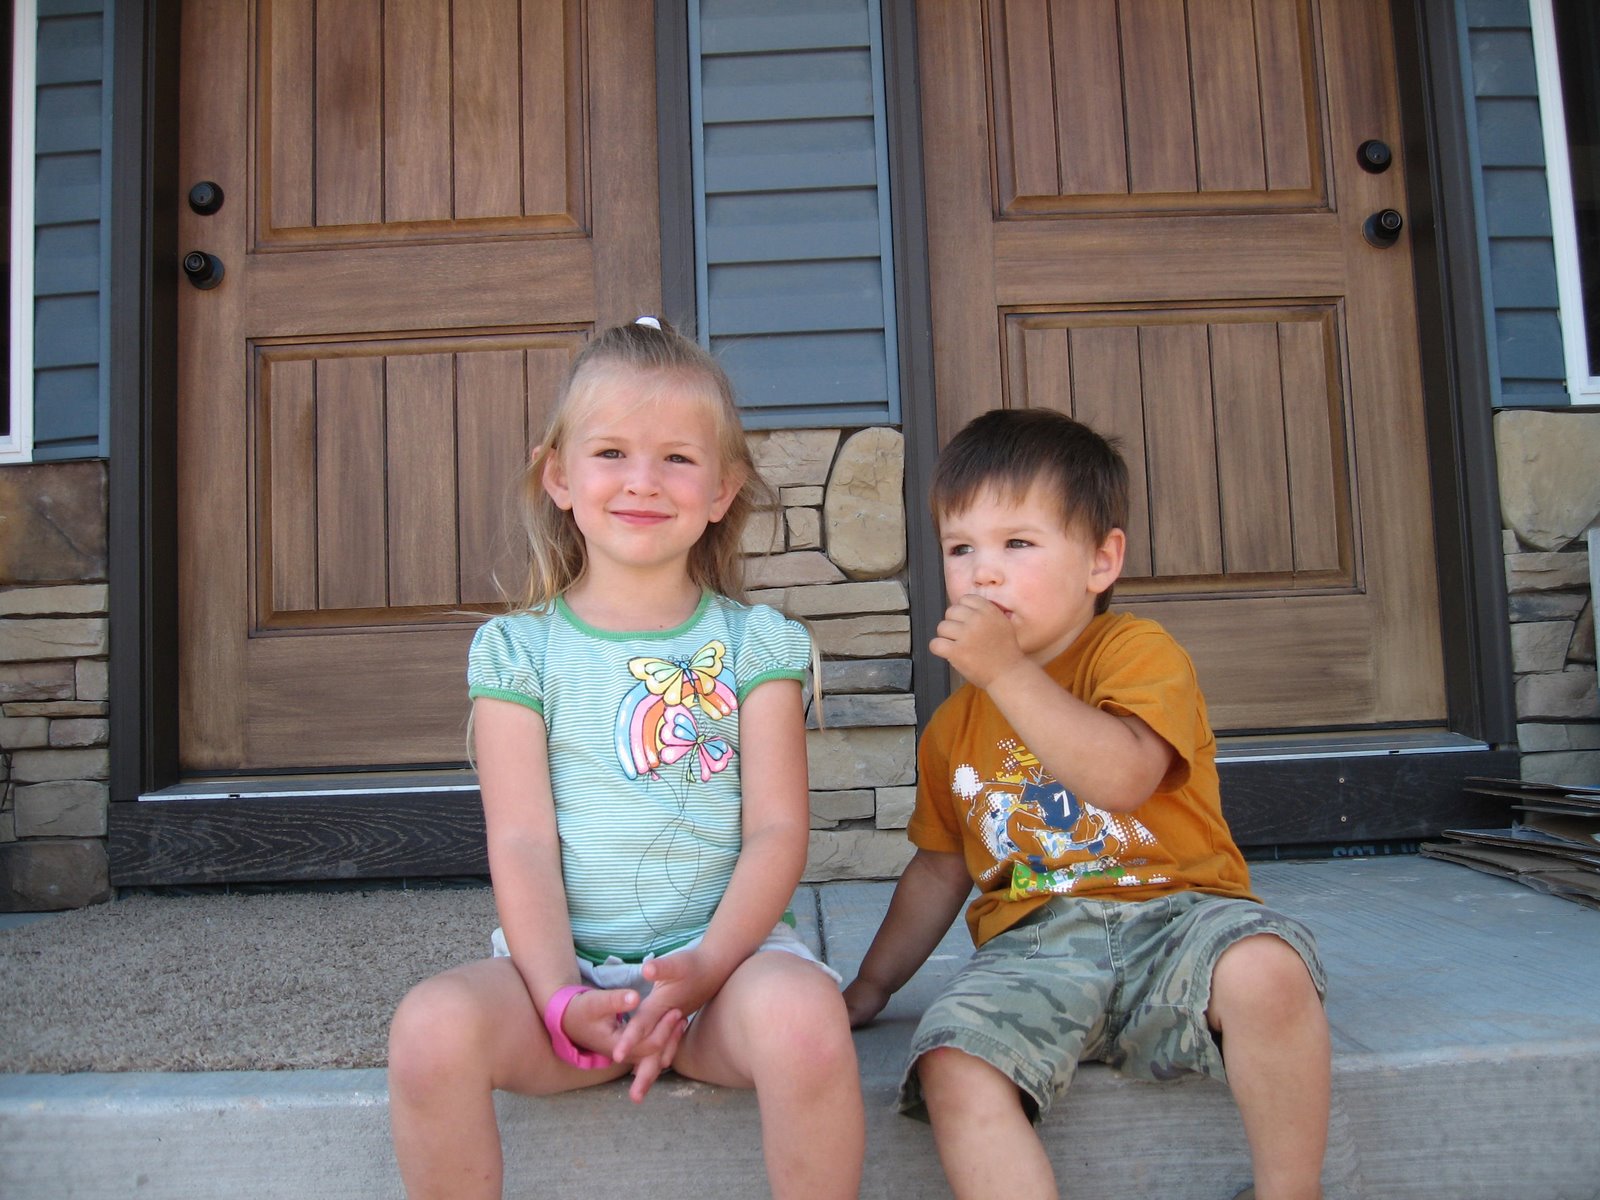 [Kamdin+&+Logan+in+front+of+their+new+house.JPG]